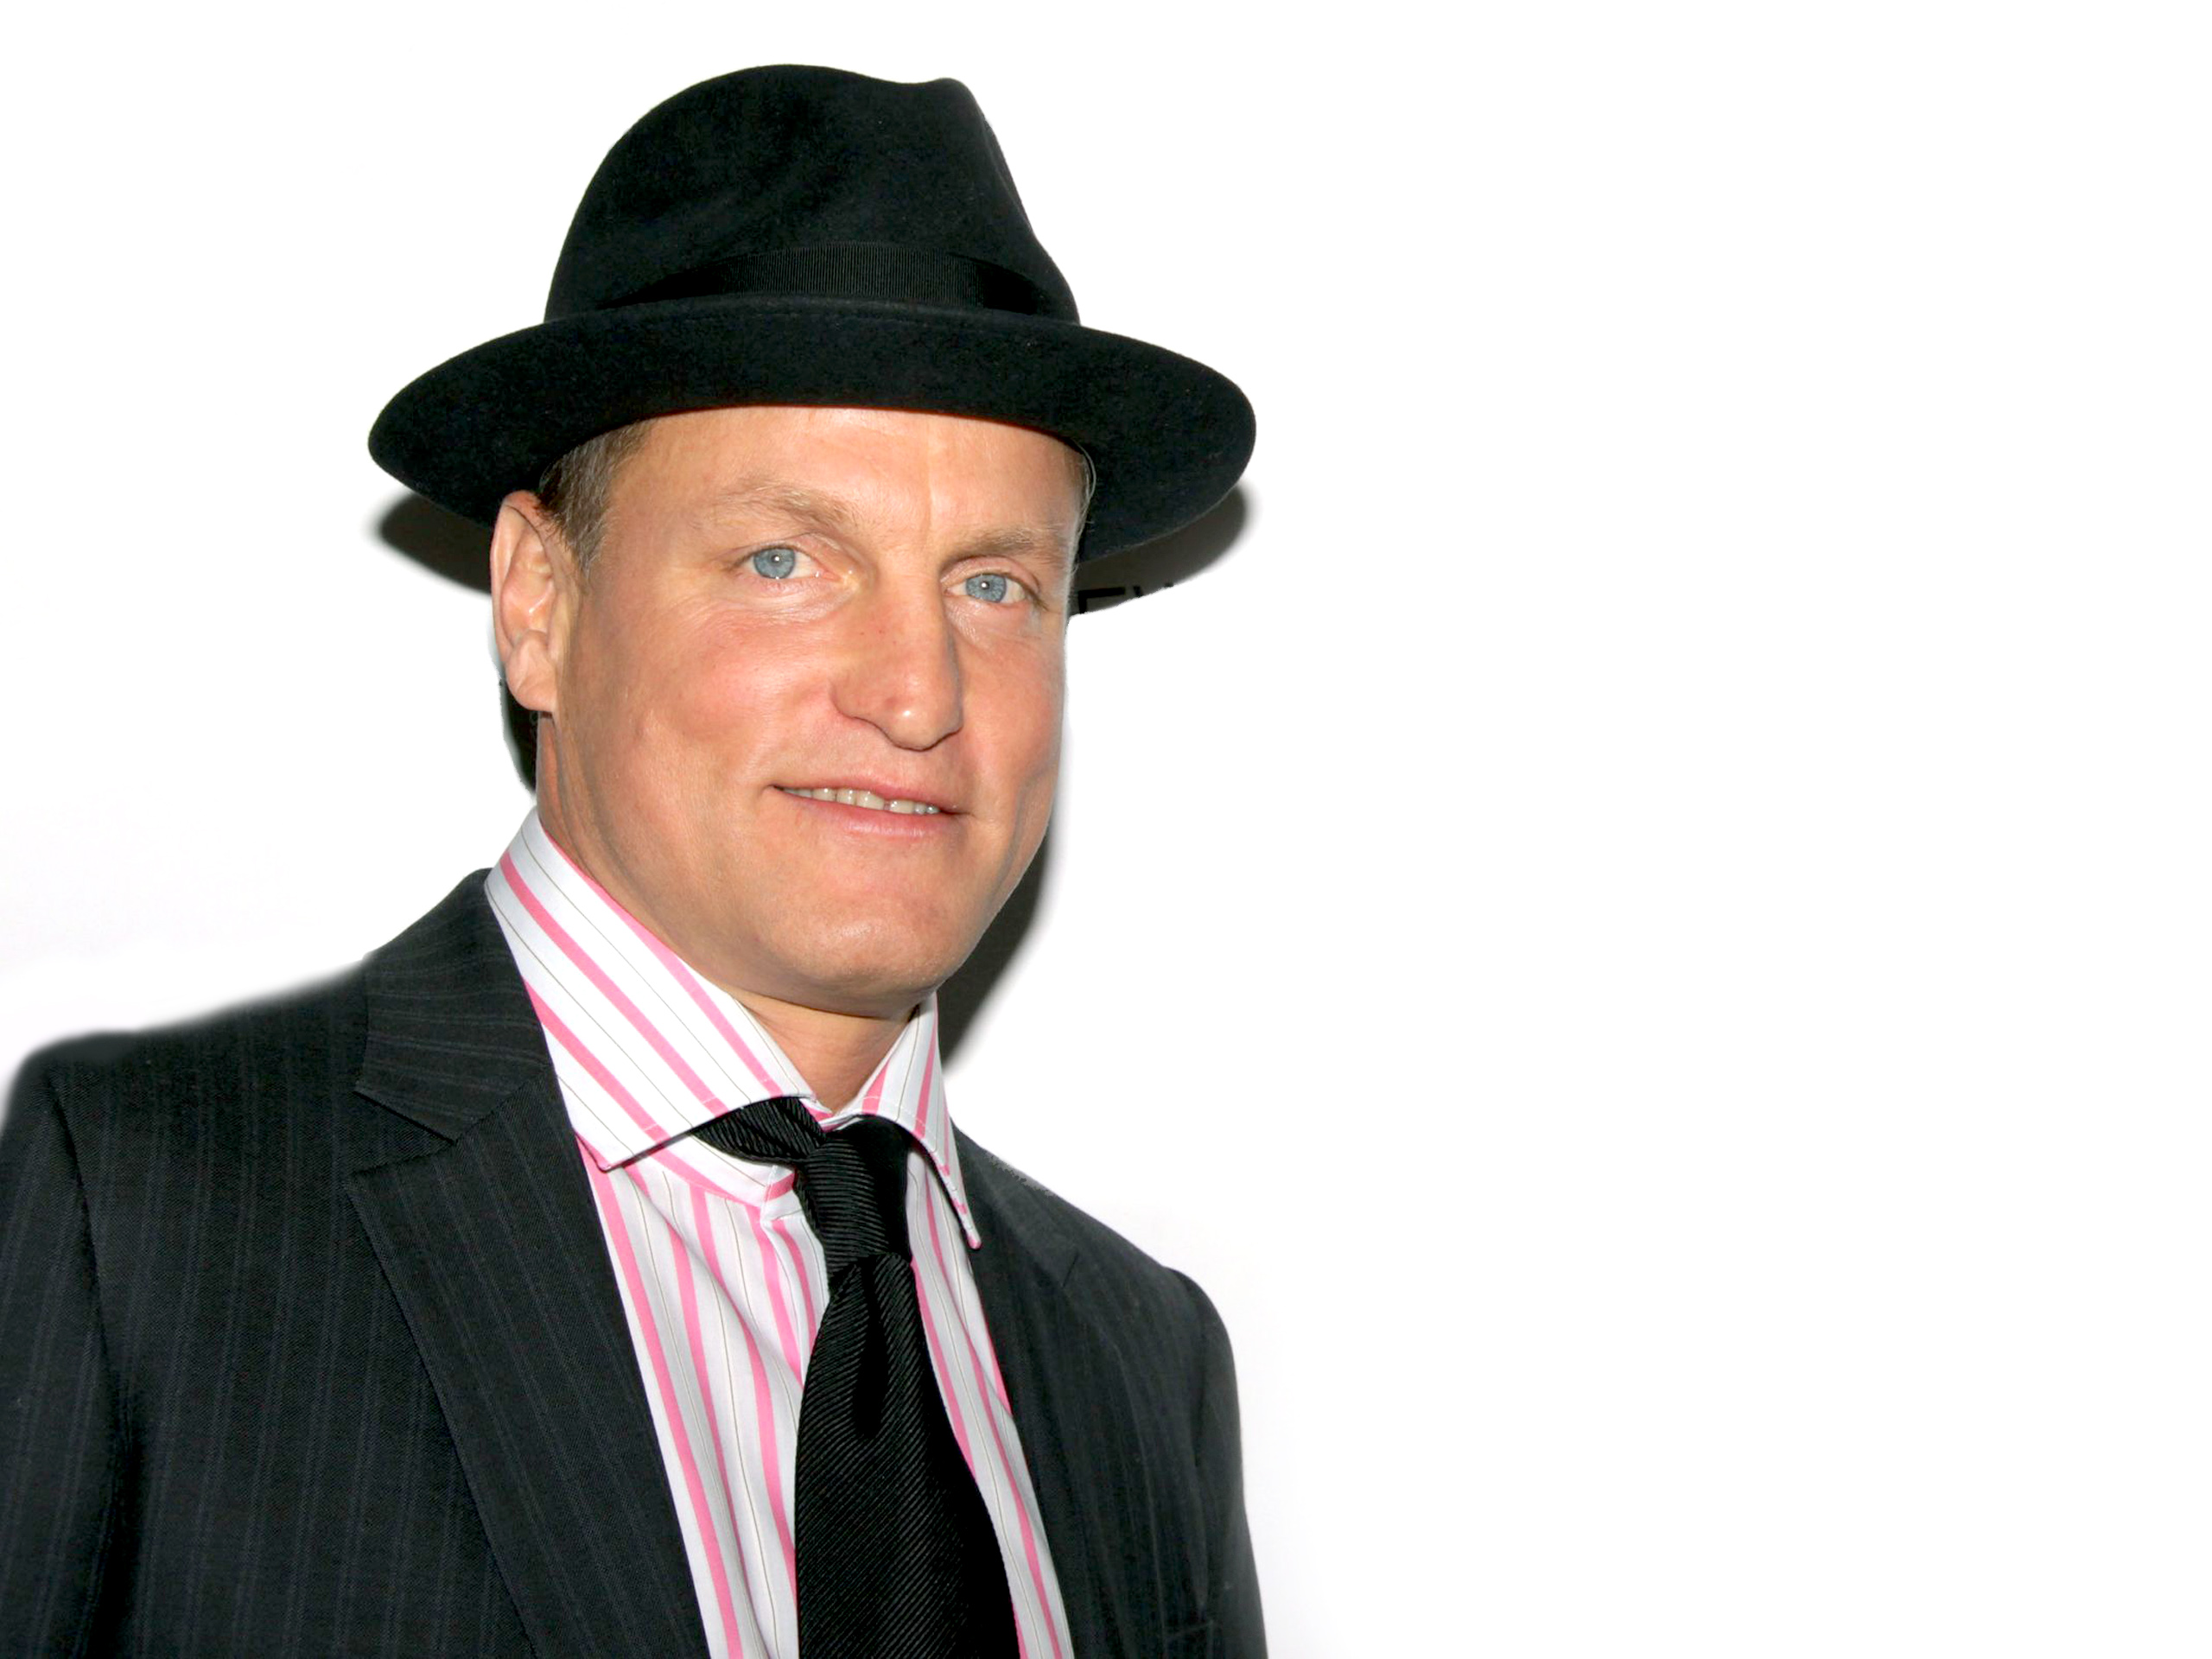 Woody Harrelson Images Wallpapers